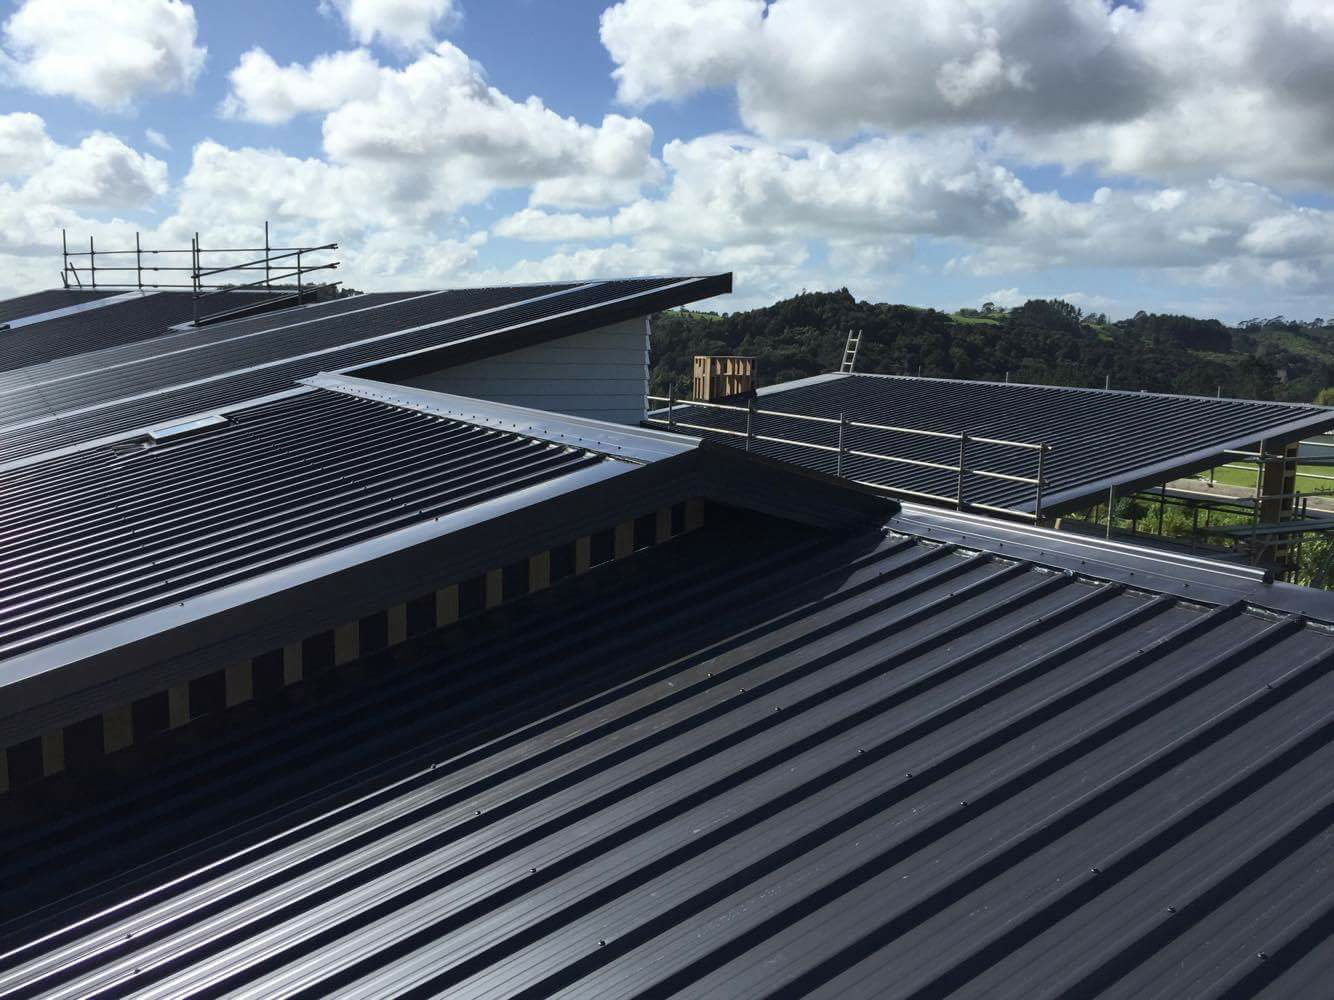 auckland roofing solutions services auckland and new zealand wide new roofs repair cladding and more Project gallery 70